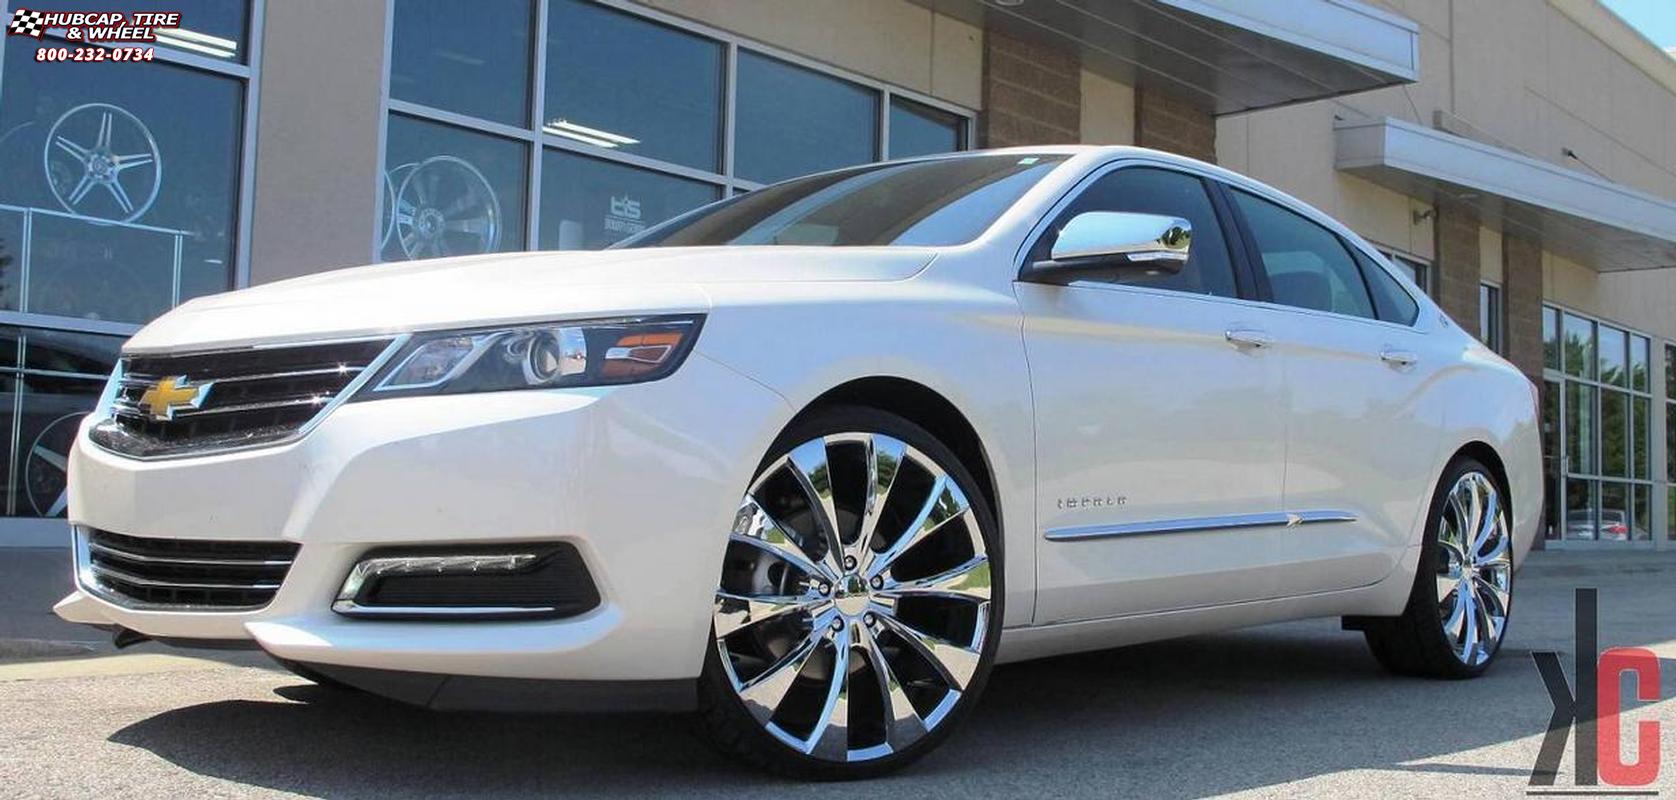 vehicle gallery/2014 chevrolet impala xd series km679 fader  Chrome wheels and rims